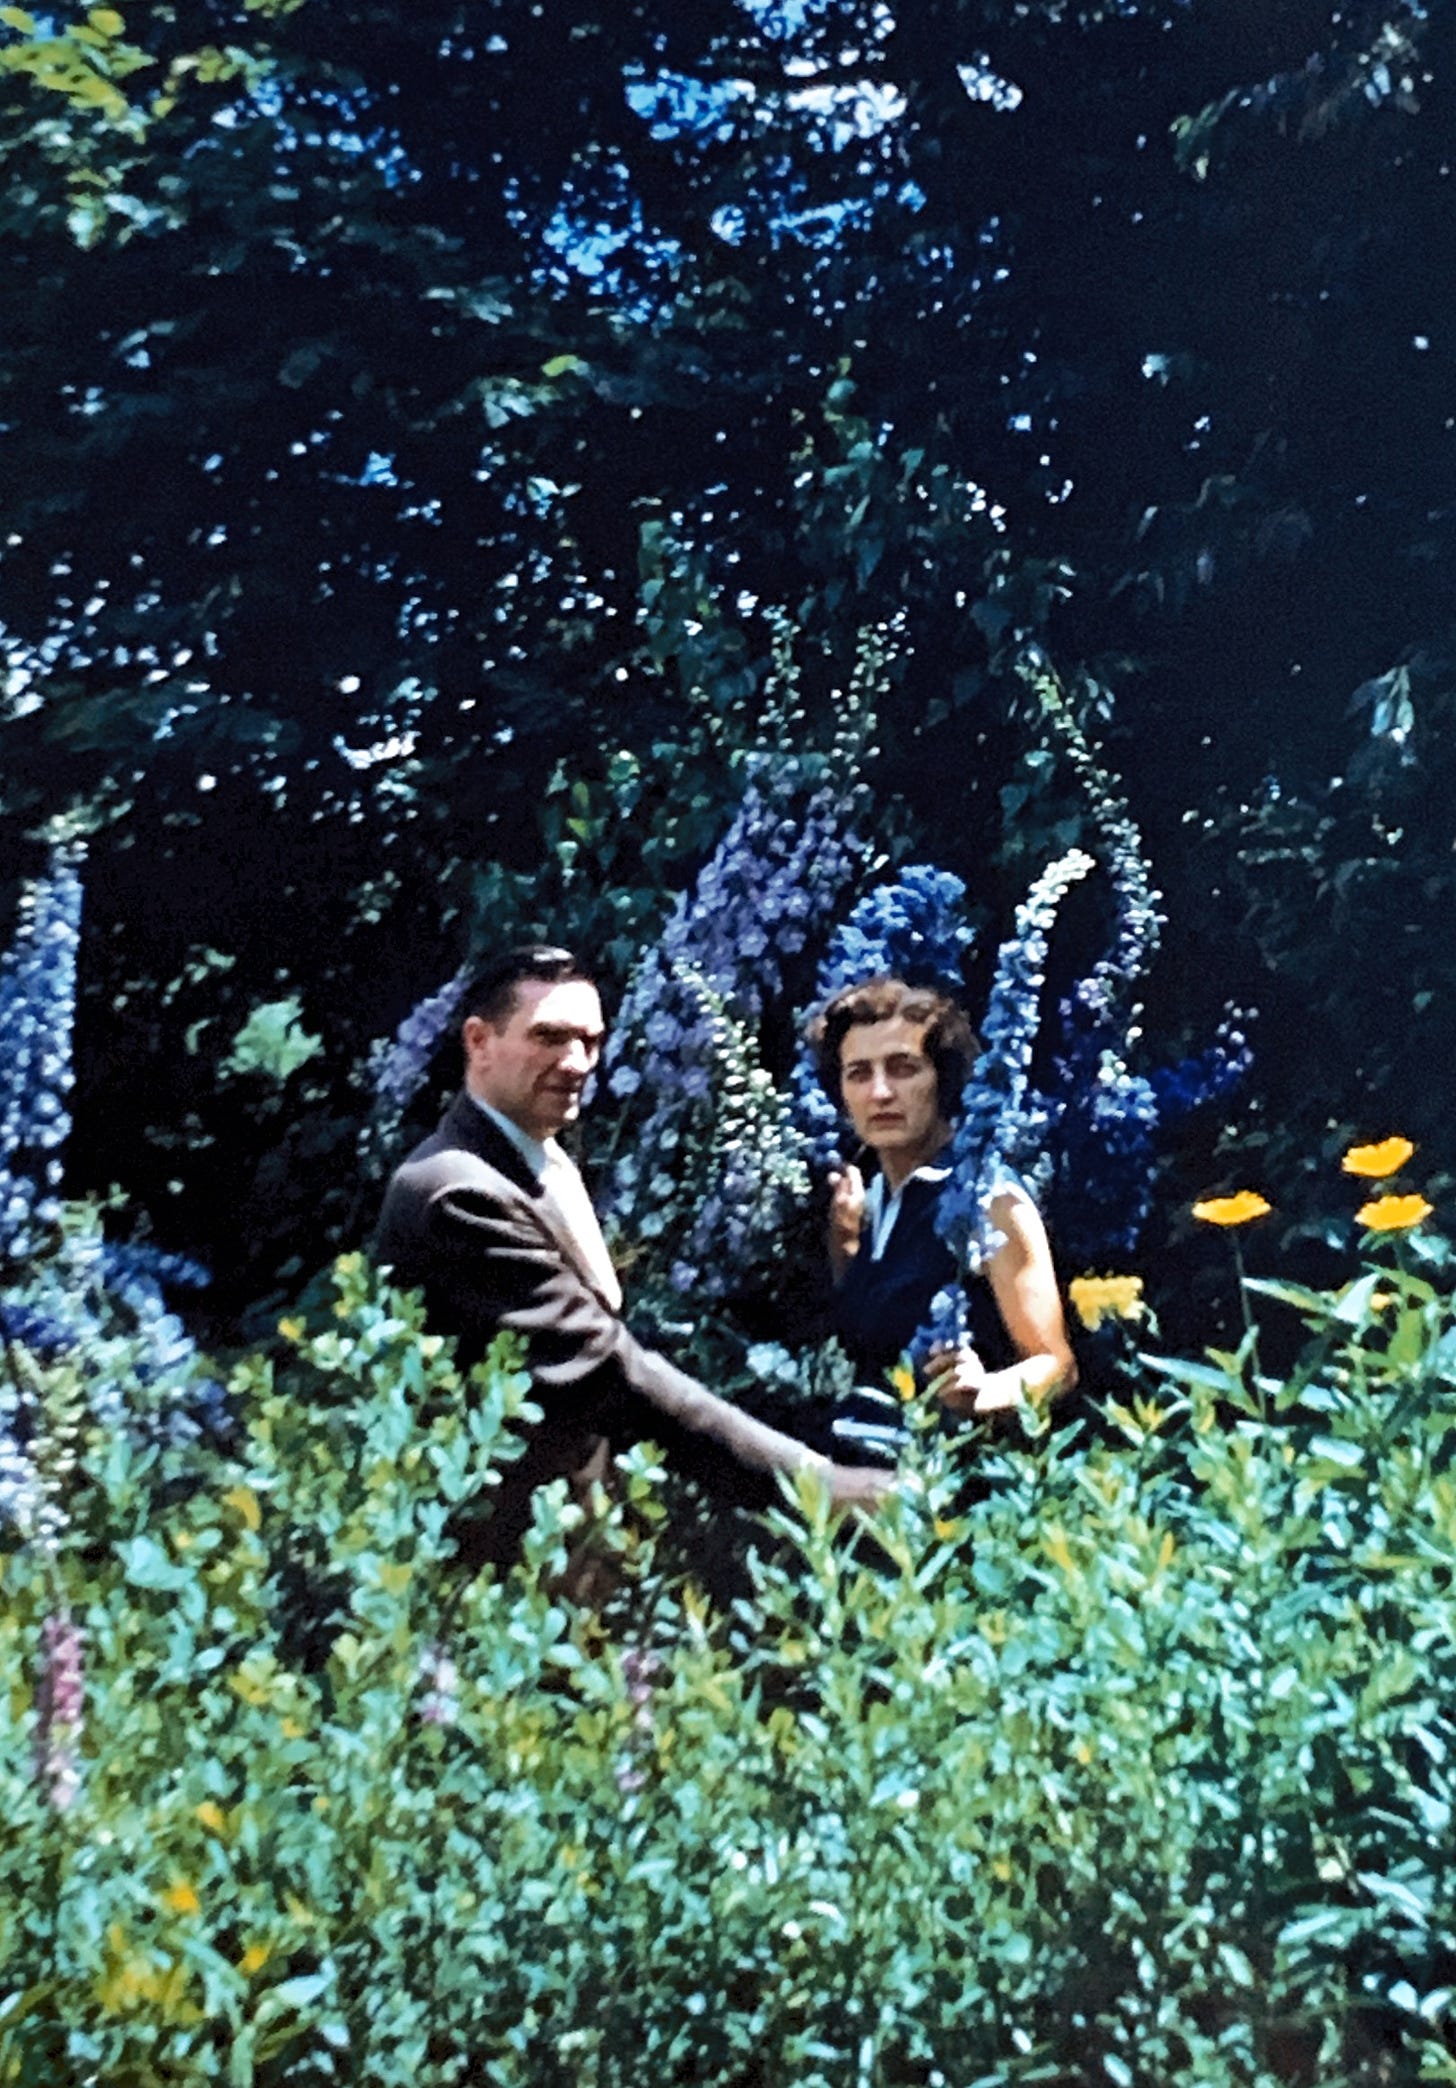 Two people in mid century dress standing amongst purple Delphinium that are taller than they are.